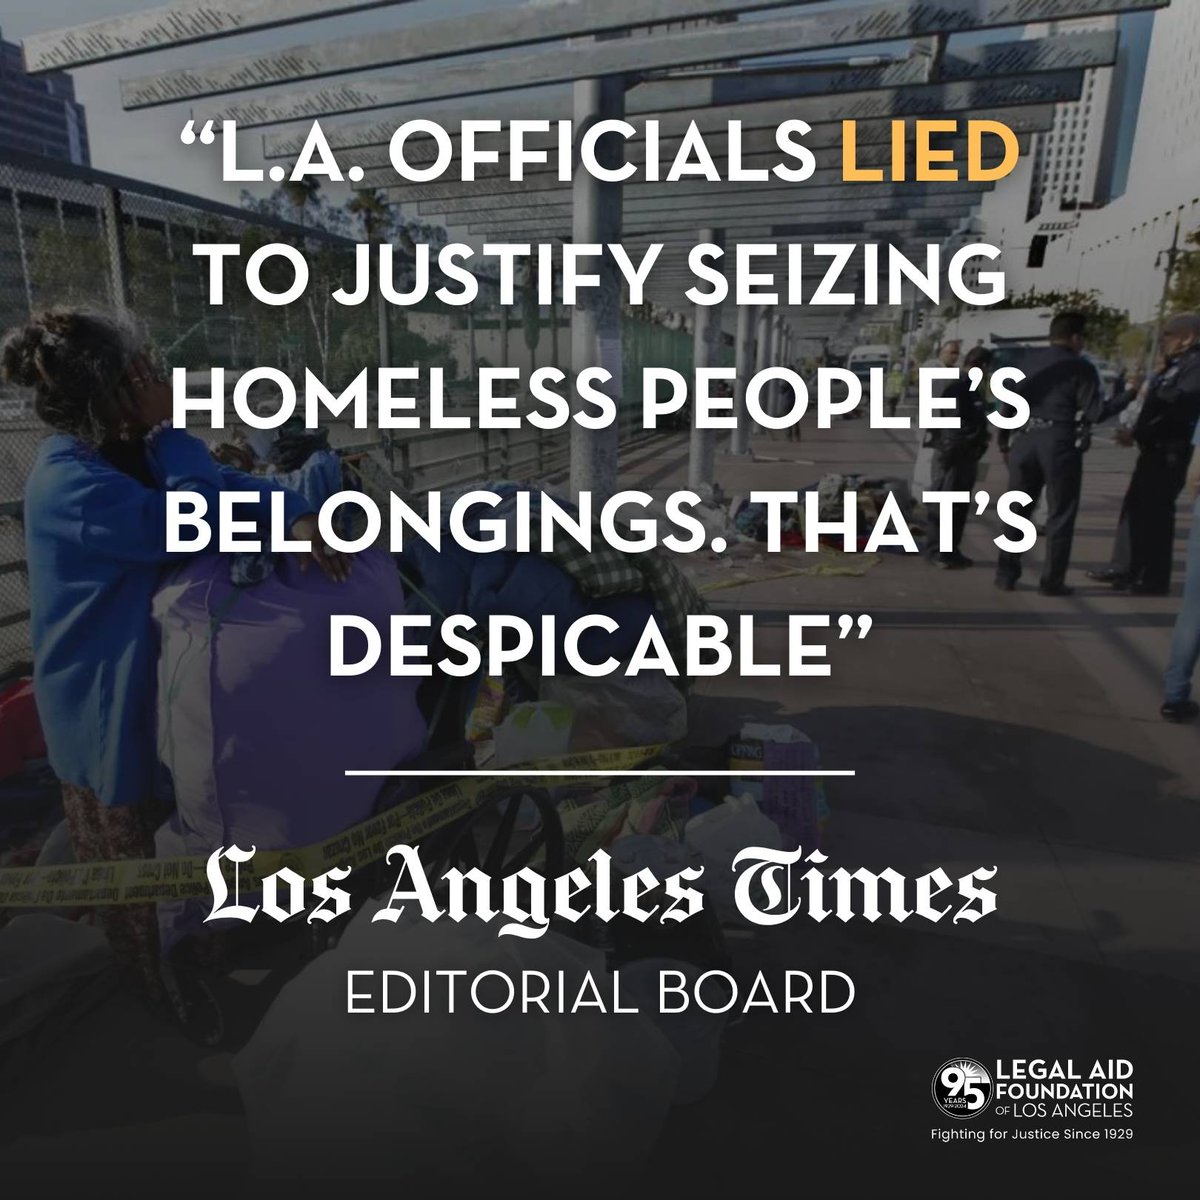 The @LATimes Editorial Board agrees: Honesty and accountability from our leaders is crucial to tackling homelessness. Read their take on the City of LA doctoring key evidence about destroying unhoused people's personal property. latimes.com/opinion/story/…